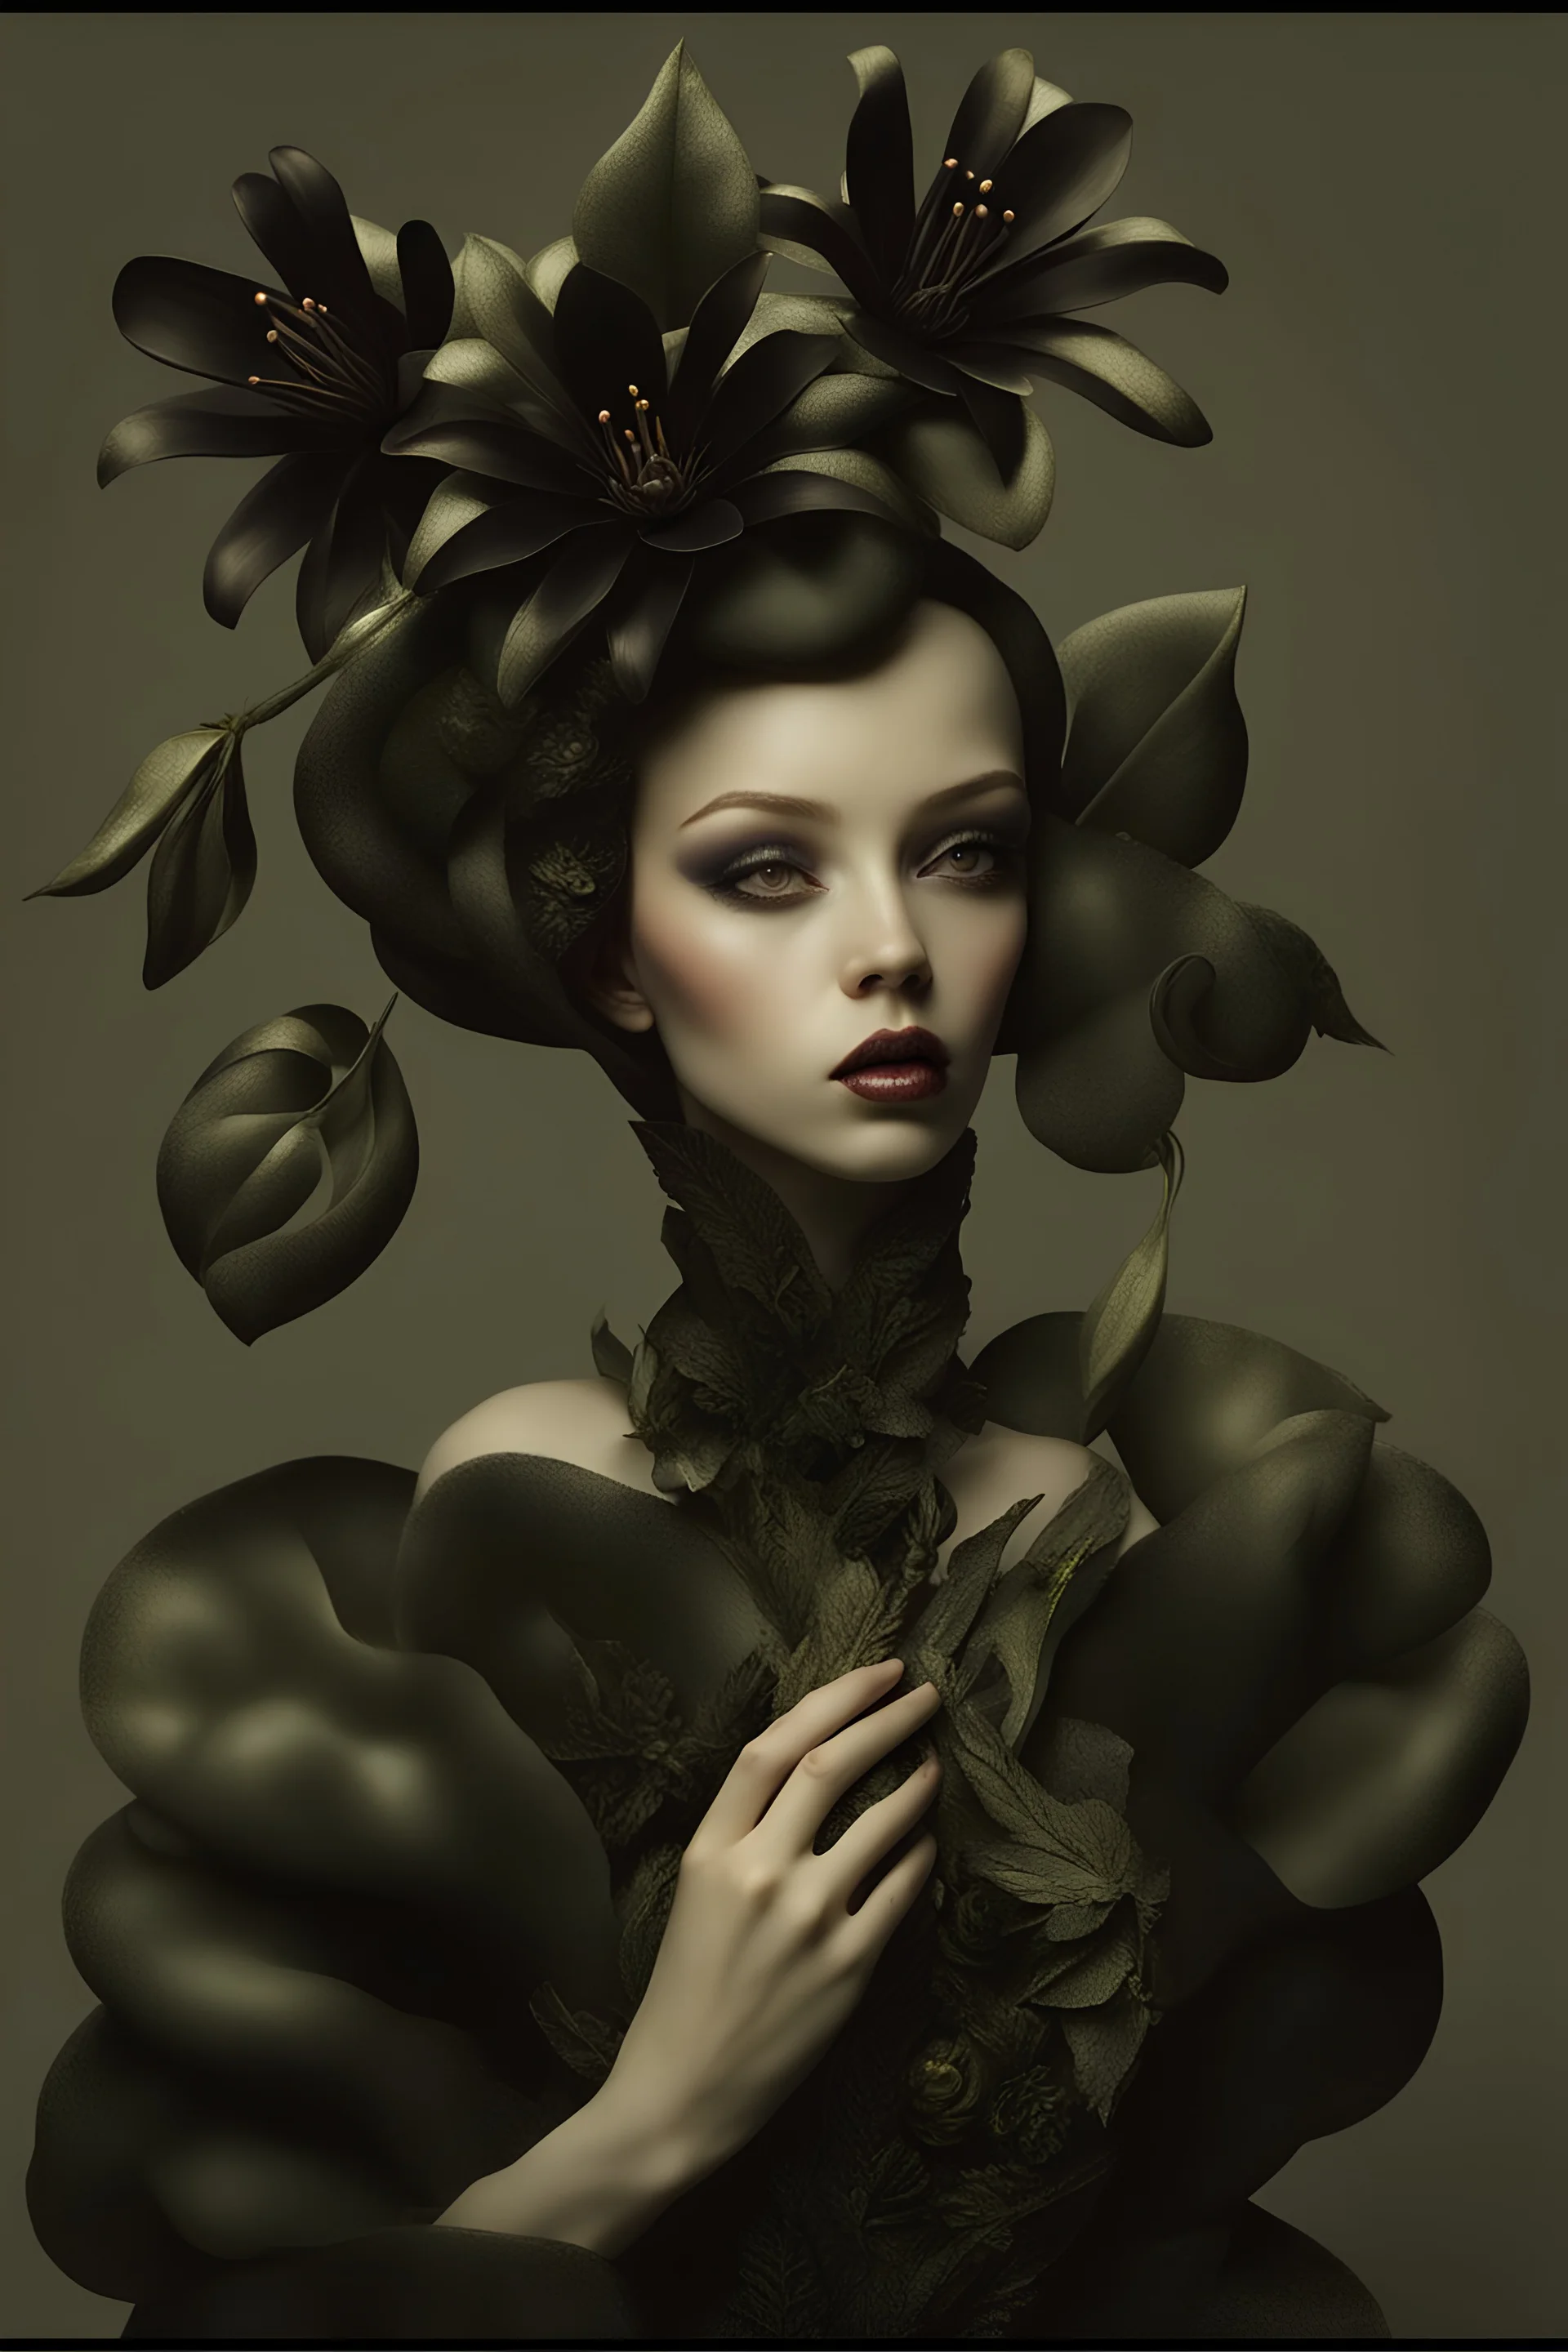 poetic licence;by artist "Dunning-Kruger effect";by photographer "Flora Borsi Bob Carlos Clarke";by artist "dark Passiflora edulis sculpted velvet colorway";intricately detailed;diorama;stunning;gorgeous;gas light"